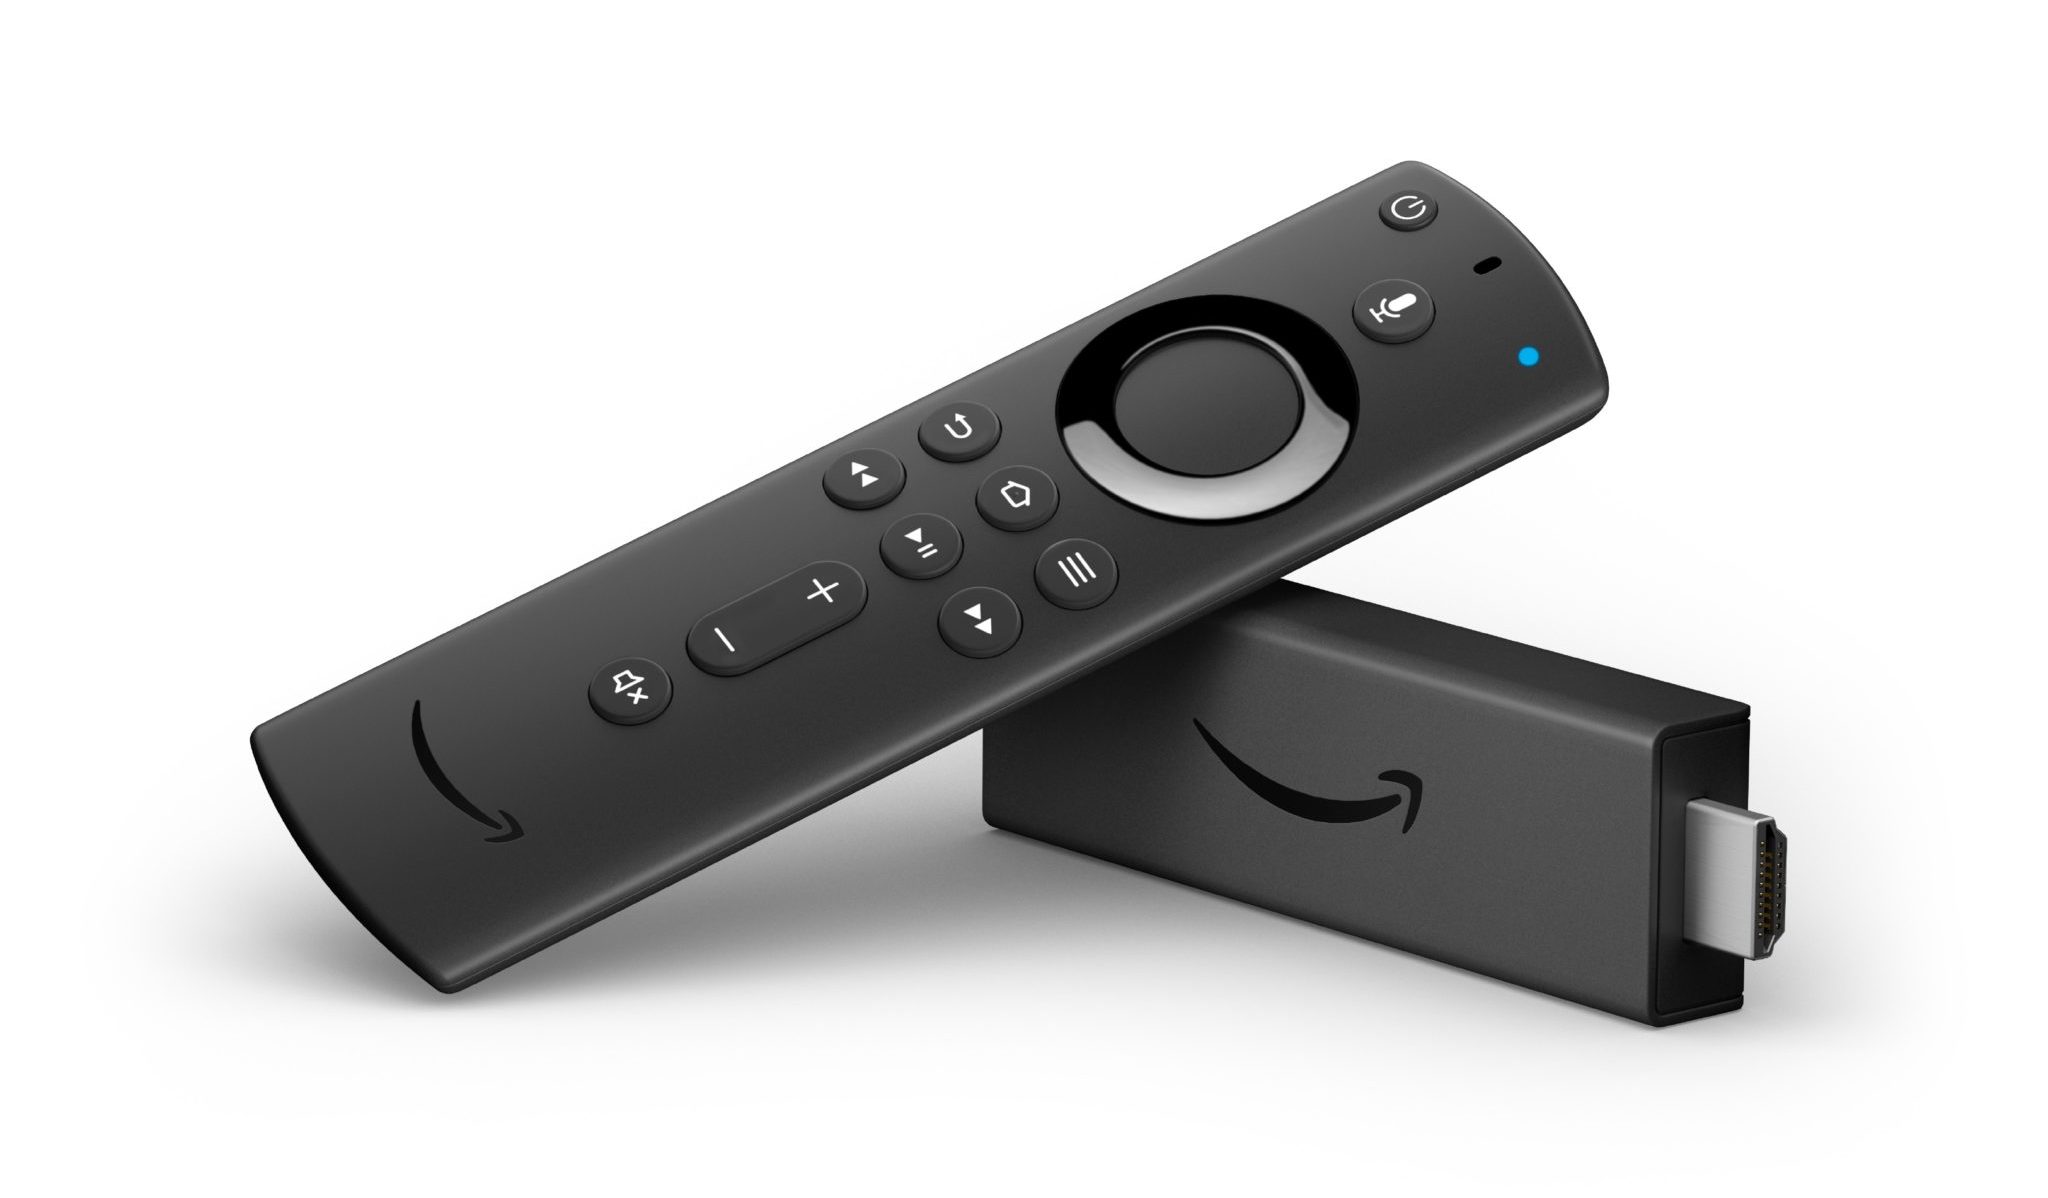 How to Watch FREE Movies & TV Shows on Fire TV, Roku, Android TV, & Apple TV